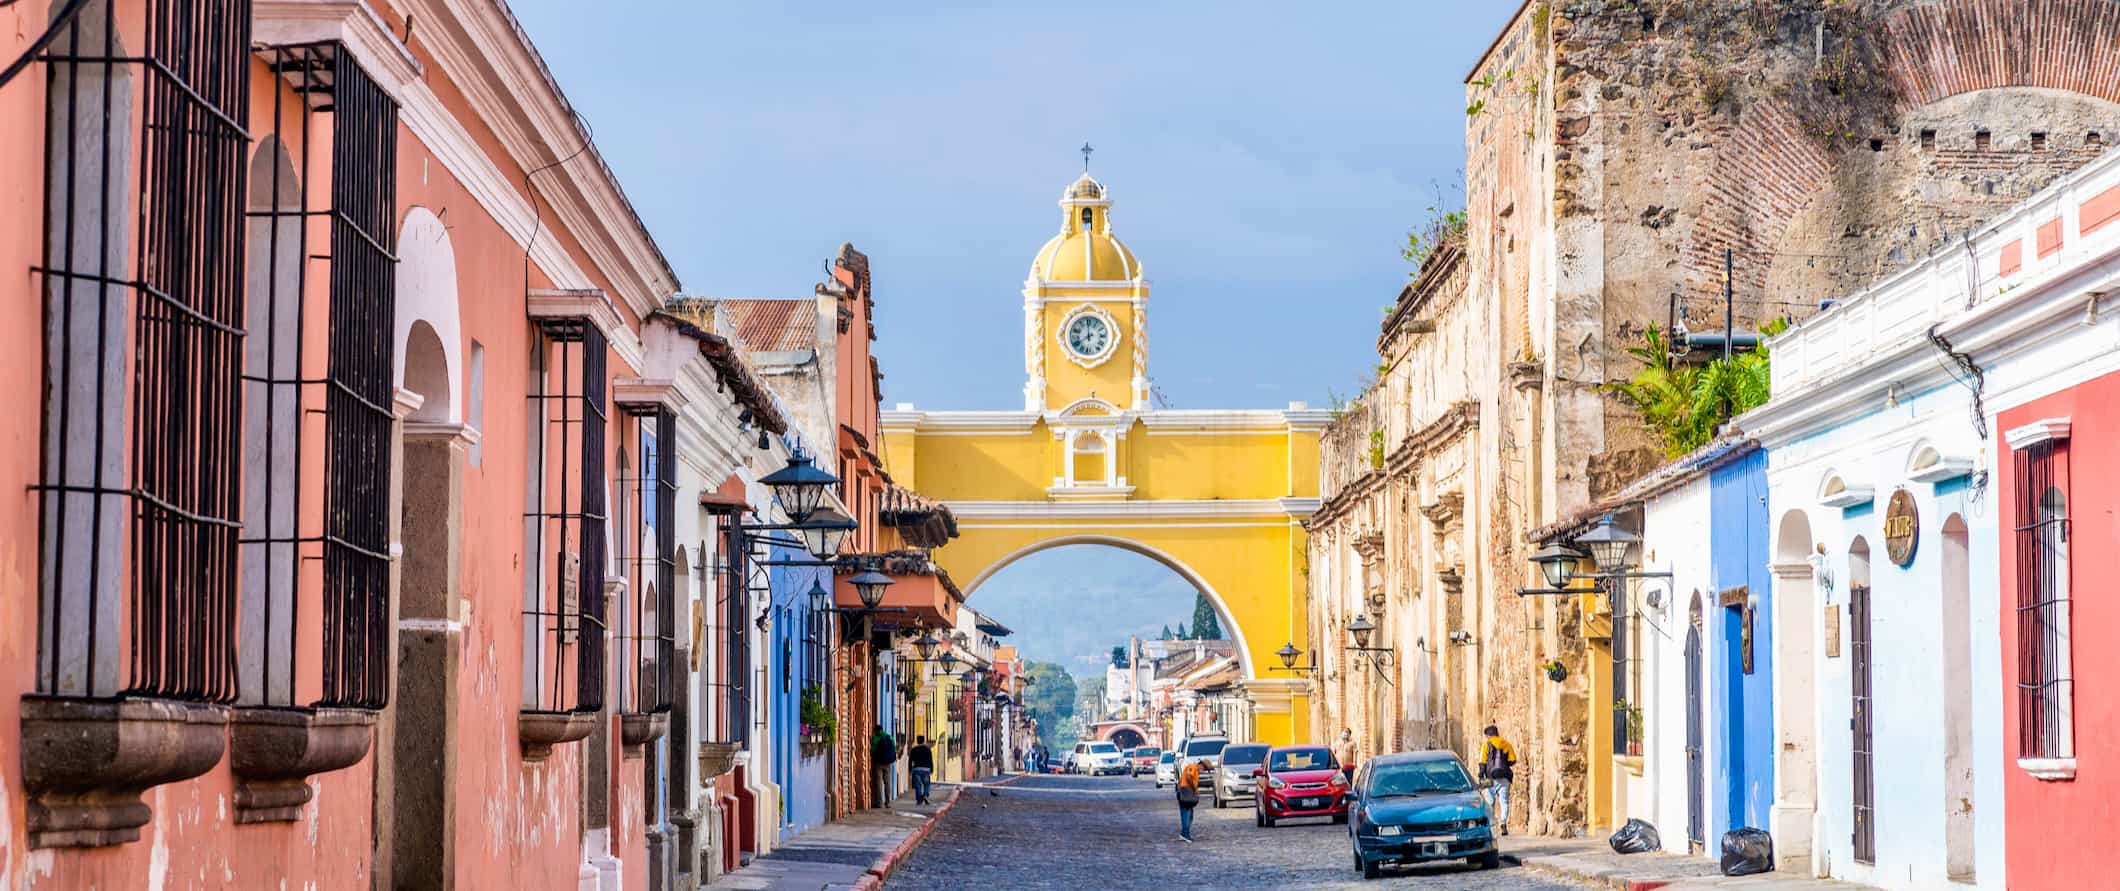 Cobblestone-lined street with brightly colored low buildings on both sides, with a yellow archway going over the street in Guatemala